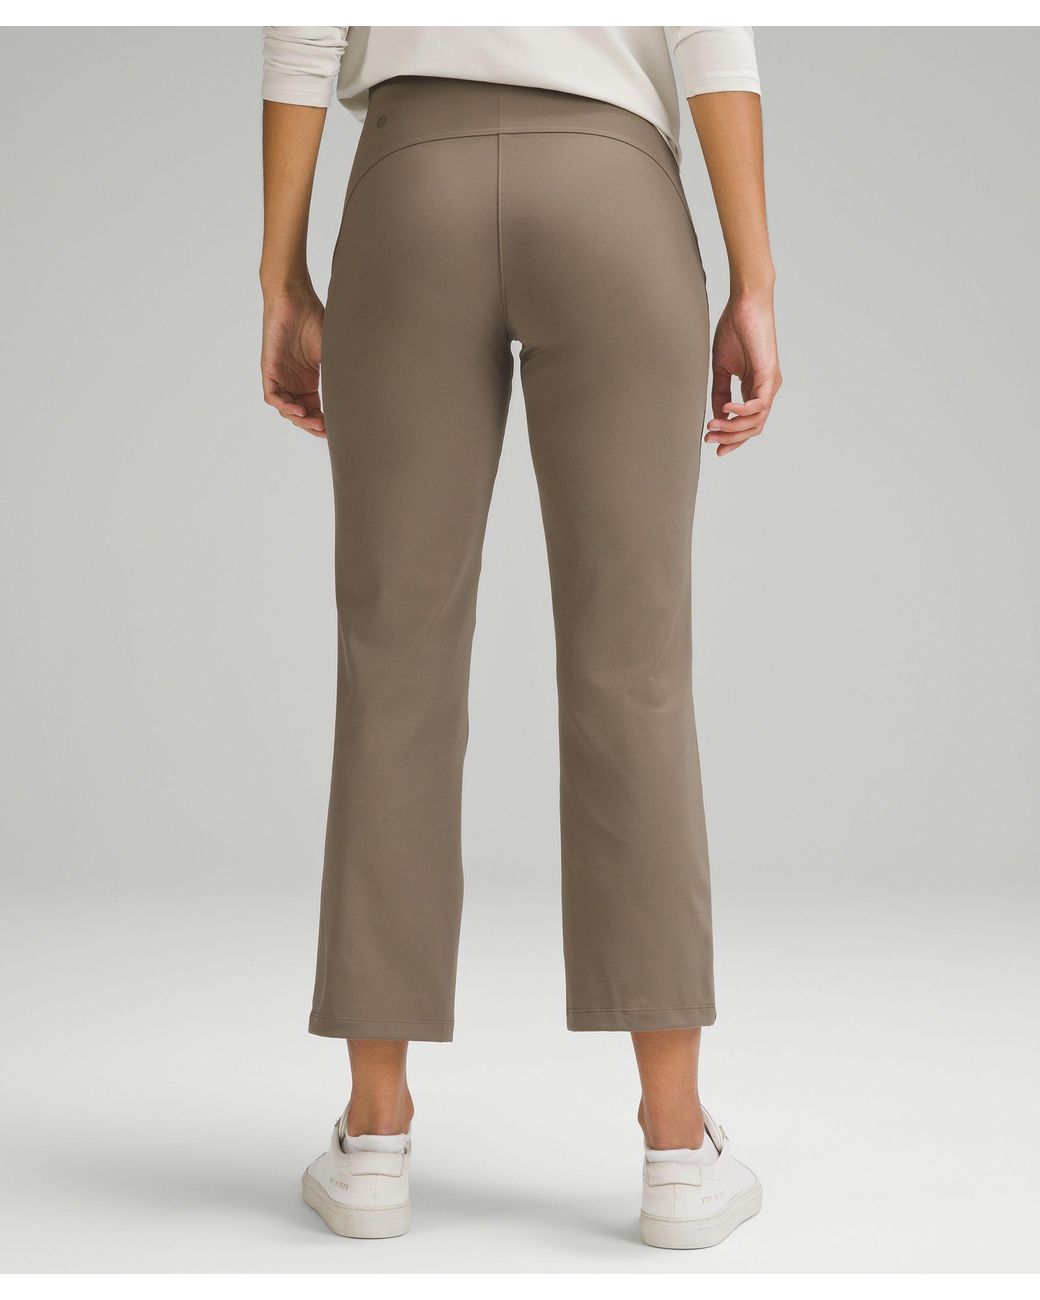 lululemon athletica Smooth Fit Pull-on High-rise Cropped Pants - Color  Brown - Size 8 in Natural